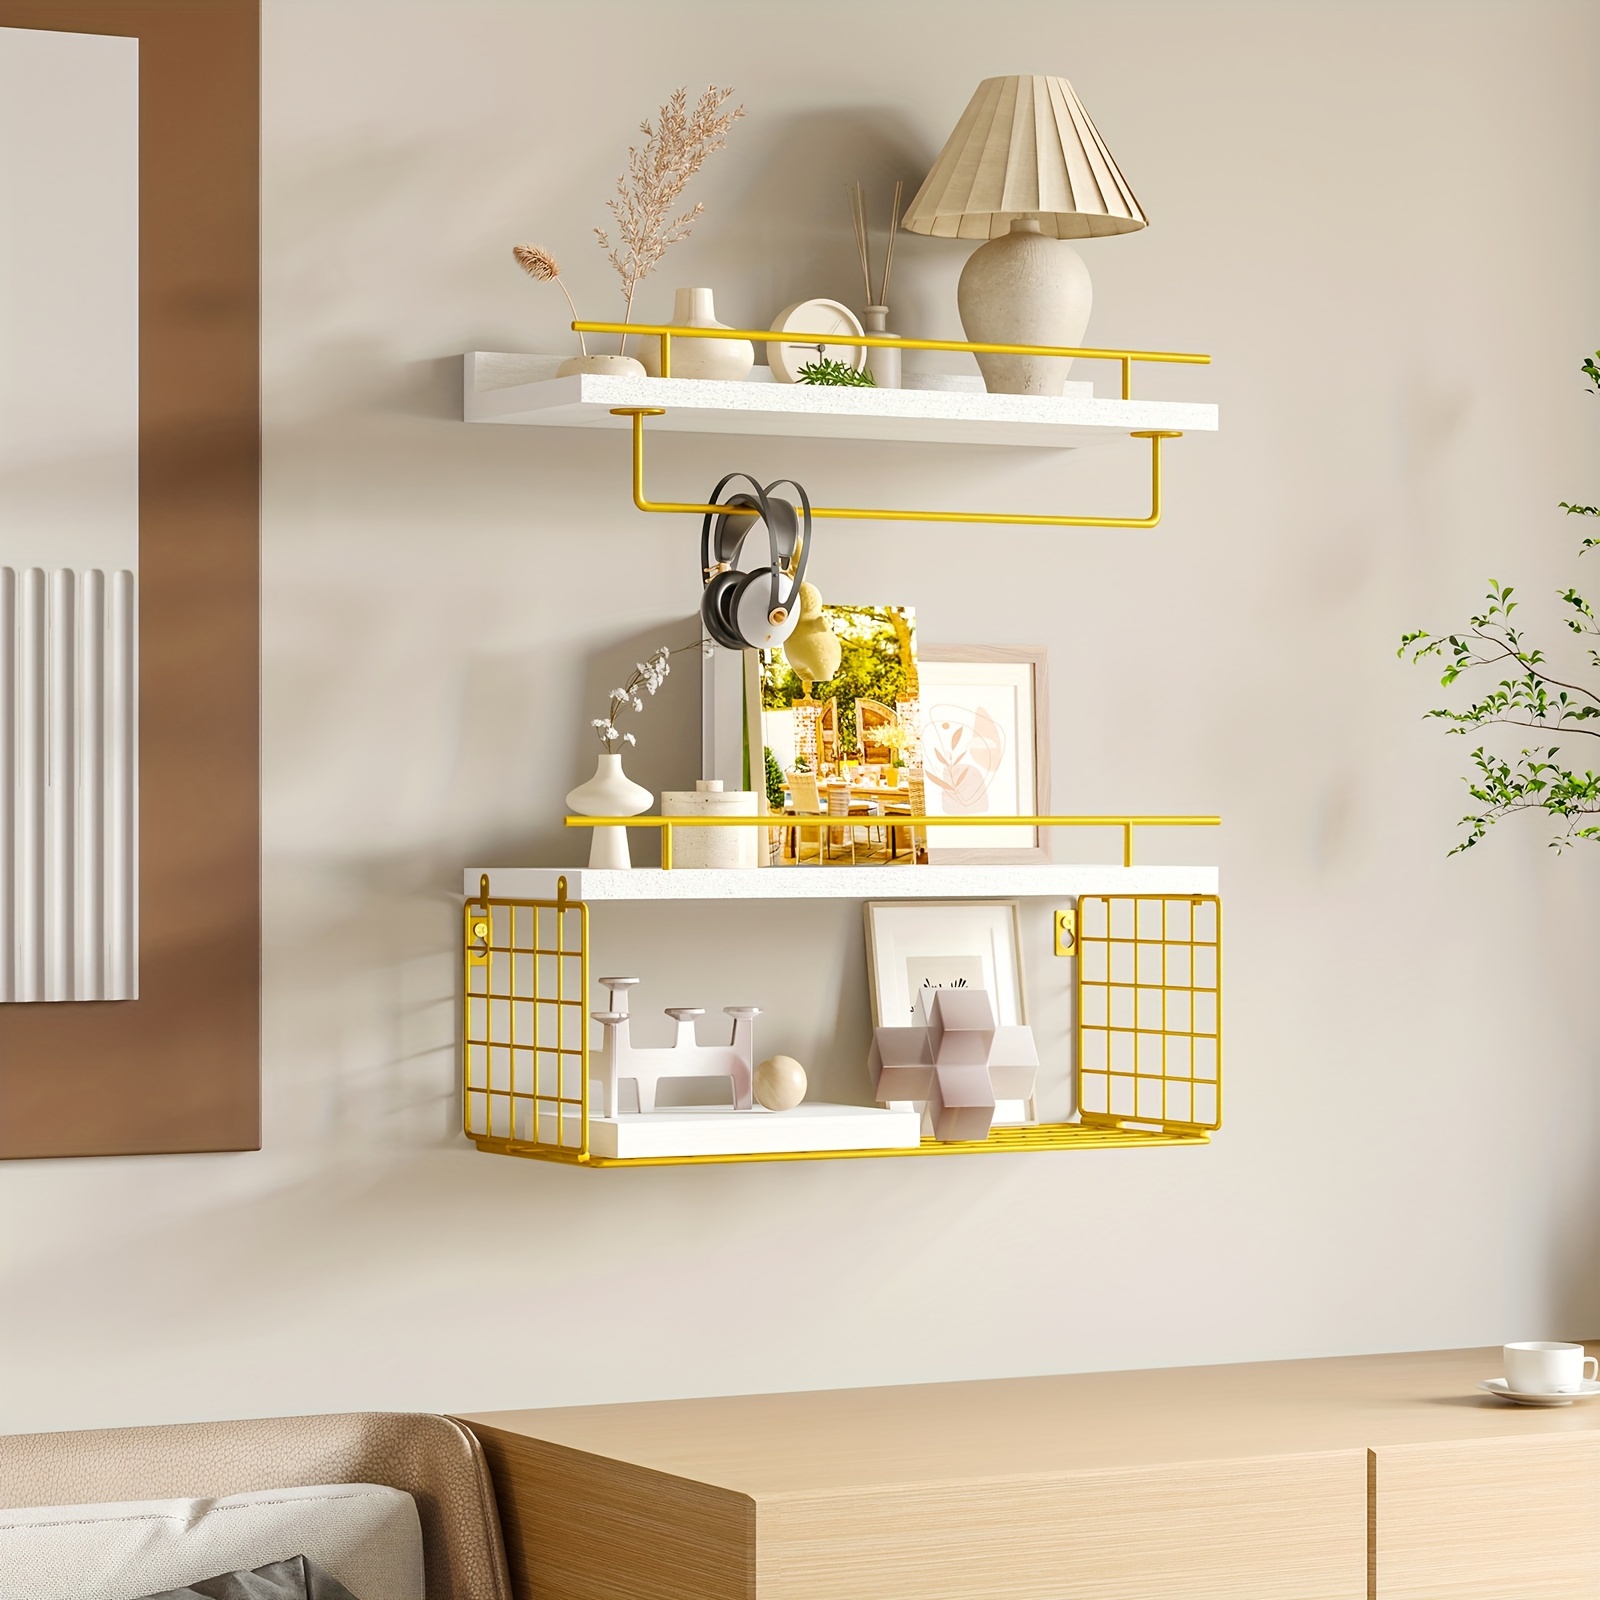 

3-shelves Floating Shelves, Bathroom Wall Decor With Storage Basket, Offer A Secure Storage Space For Bathroom Accessories, Shelves With Towel Rack For Bedroom (white & Gold)